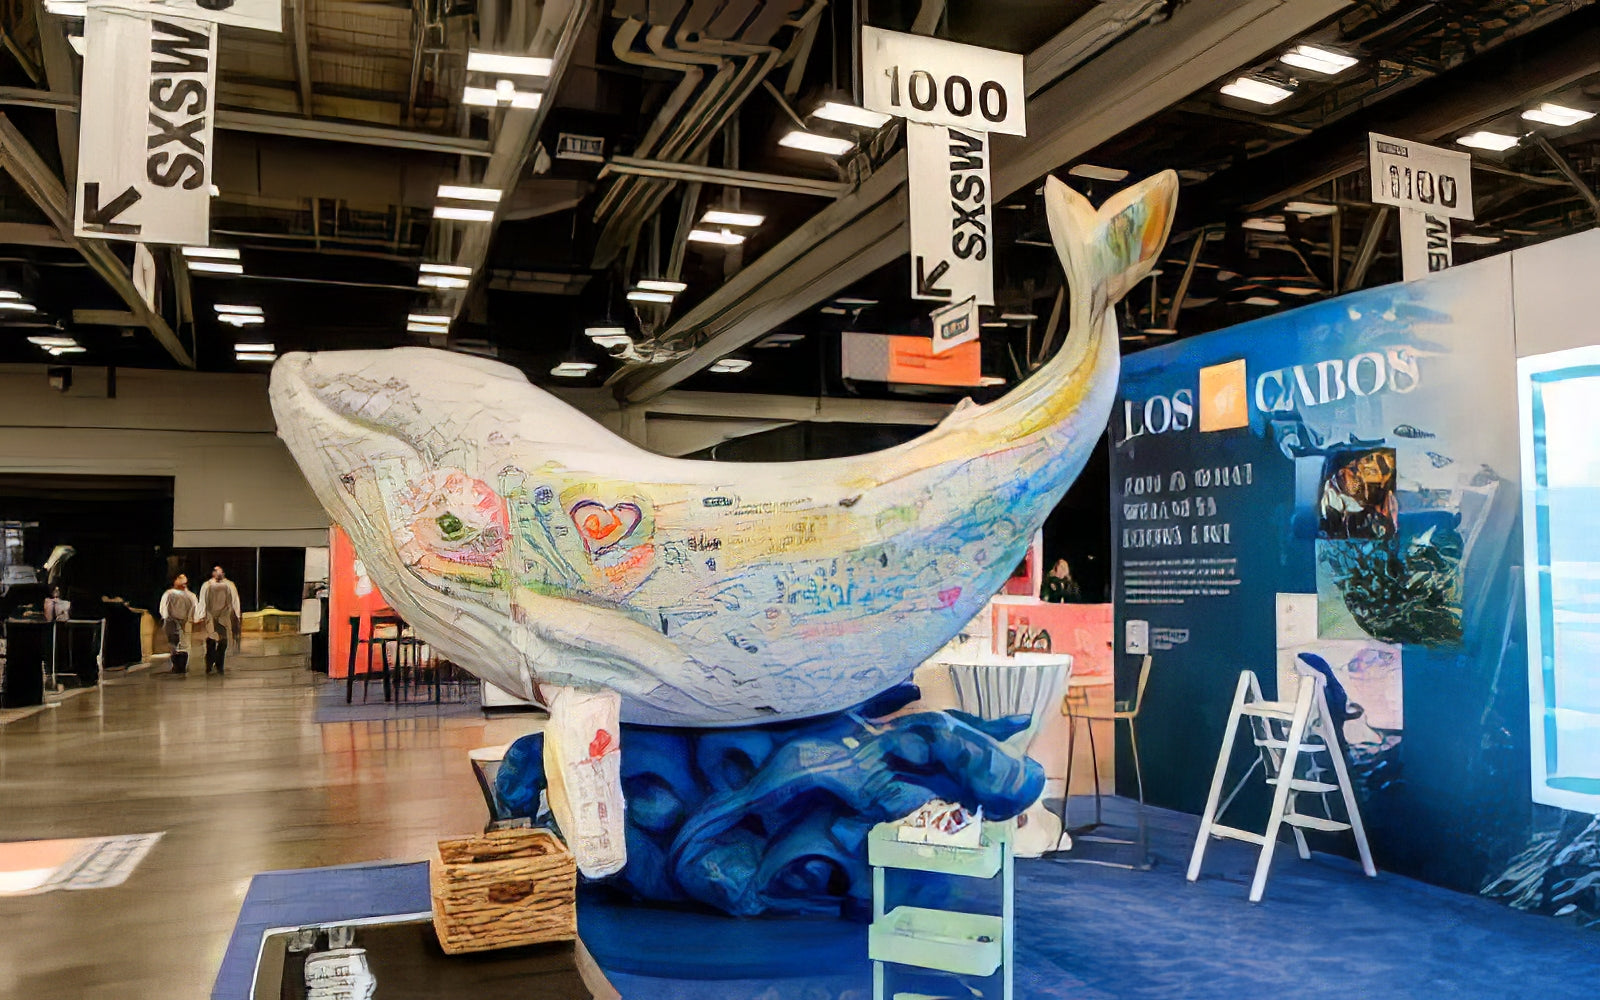 Elevating Los Cabos Tourism through Ivan Guaderrama's Interactive Art and Innovation at SXSW